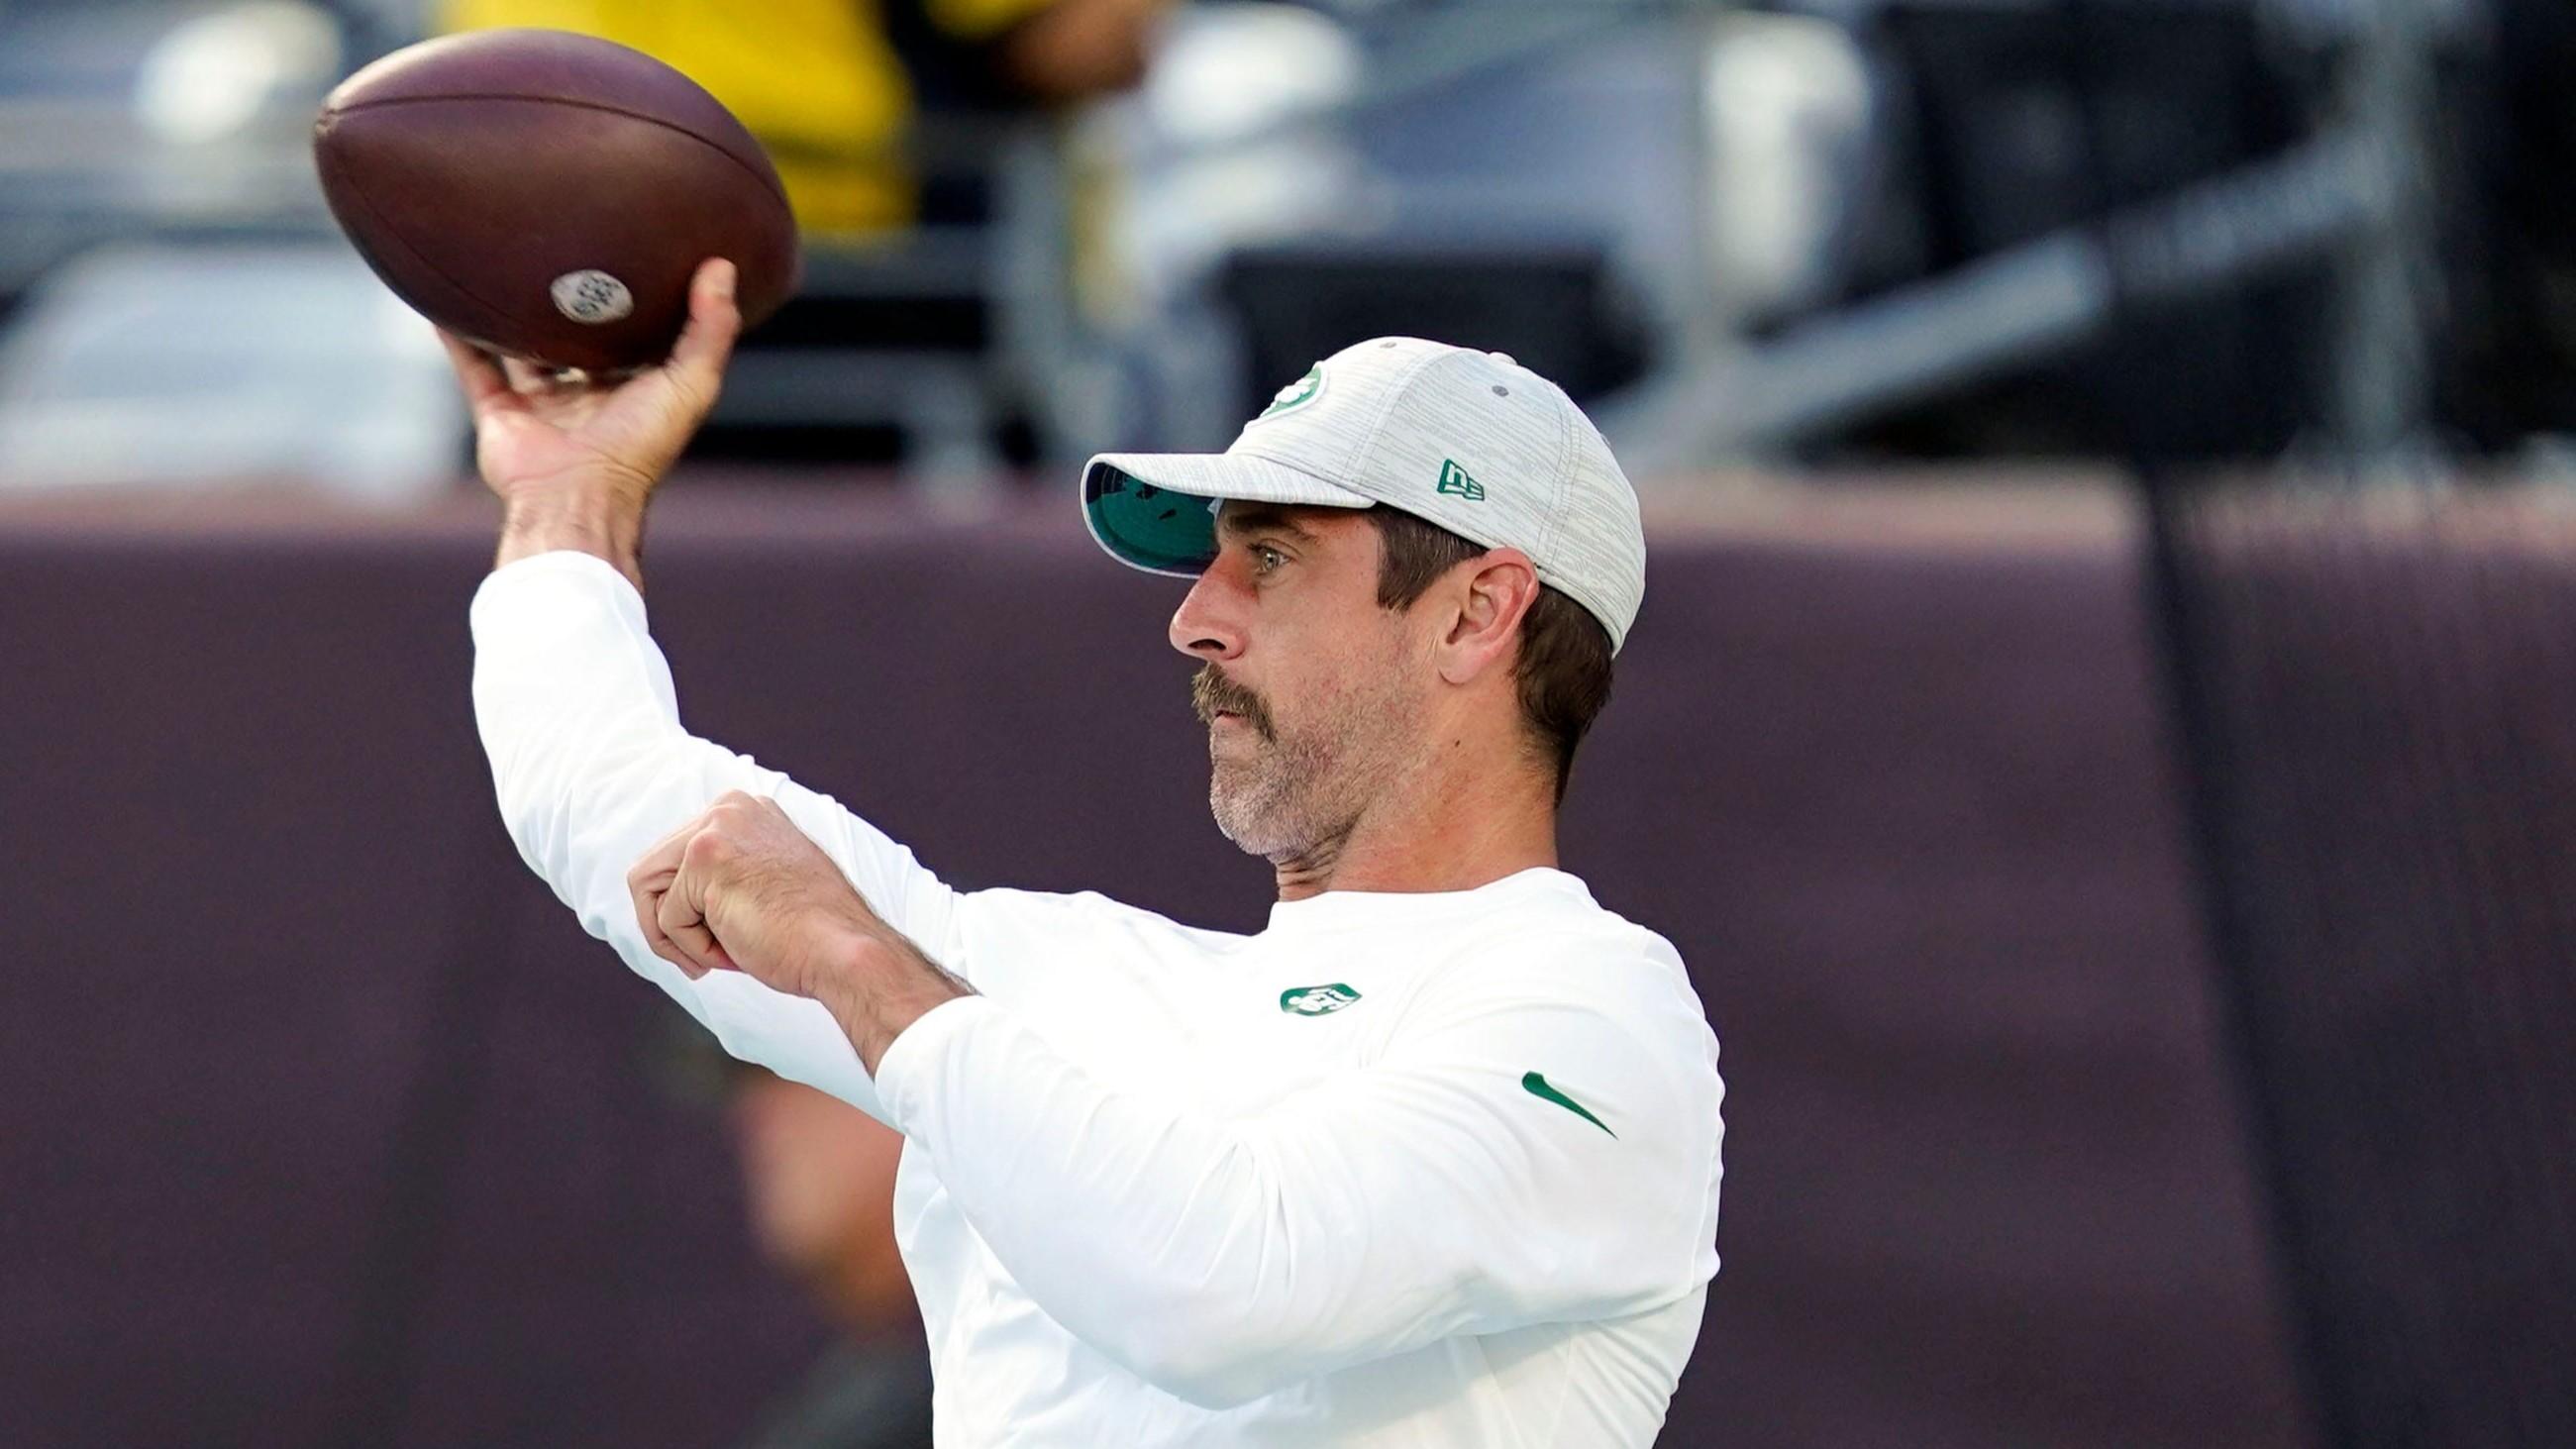 New York Jets quarterback Aaron Rodgers throws the ball during warmups before a preseason NFL game at MetLife Stadium on Saturday, Aug. 19, 2023, in East Rutherford. / © Danielle Parhizkaran/NorthJersey.com / USA TODAY NETWORK